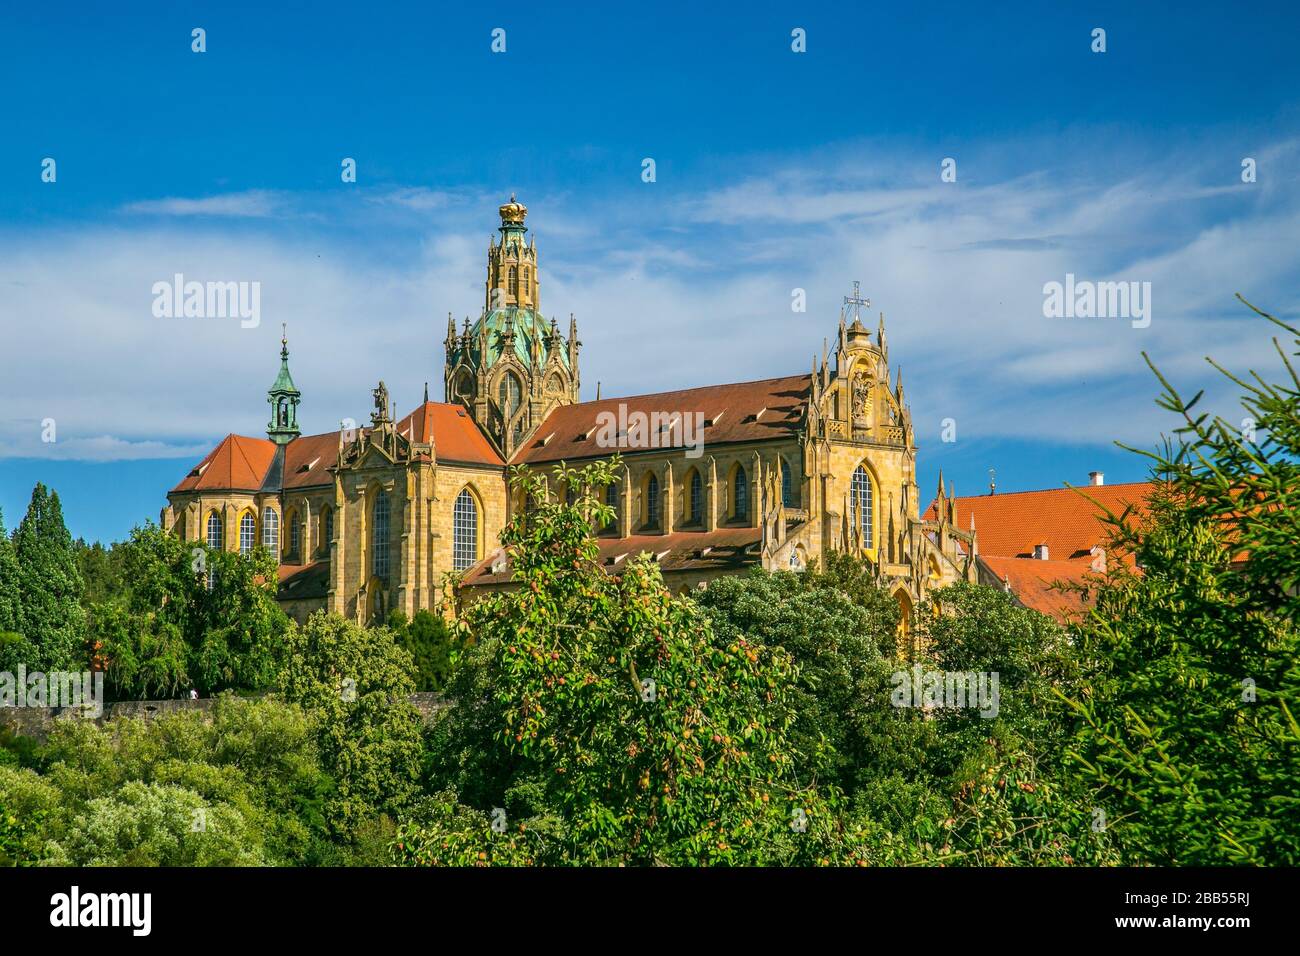 Monumental monastery of Benedictines in Kladruby, Czech Republic, Europe from 12th century standing on hill, includes church of All Saints. Stock Photo